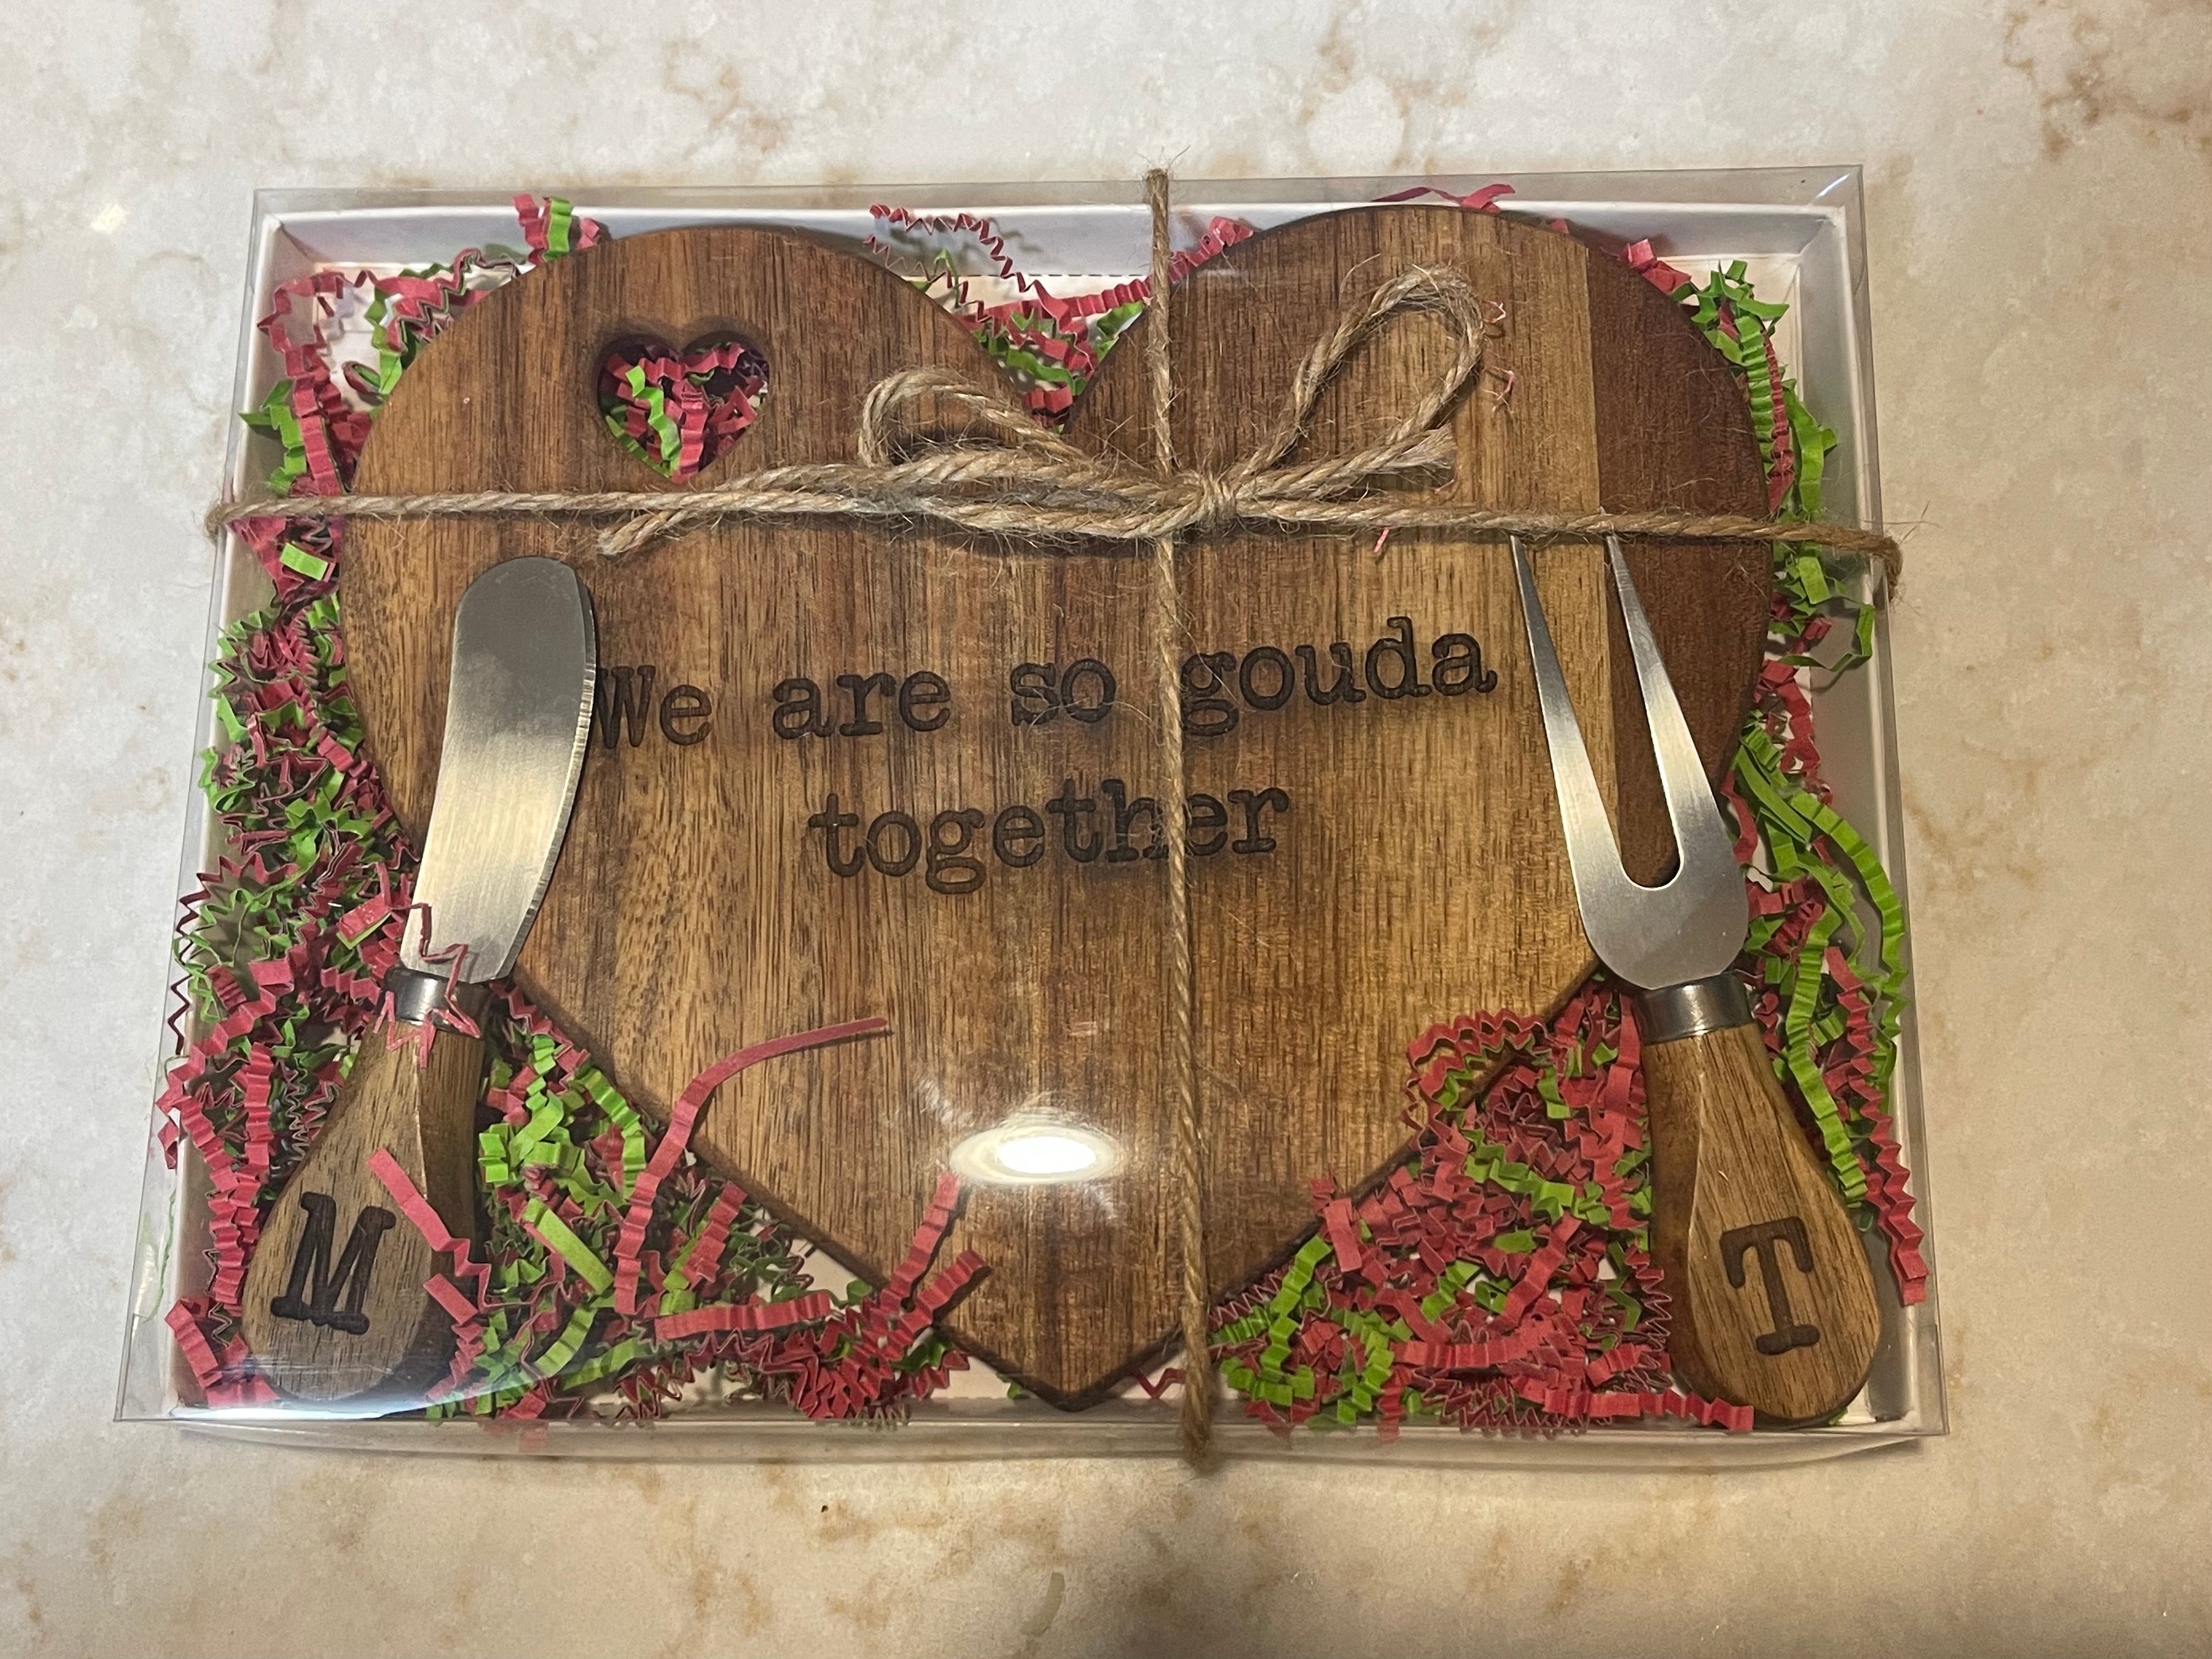 Personalized Heart Shaped Cutting Board: We Are So Gouda Together